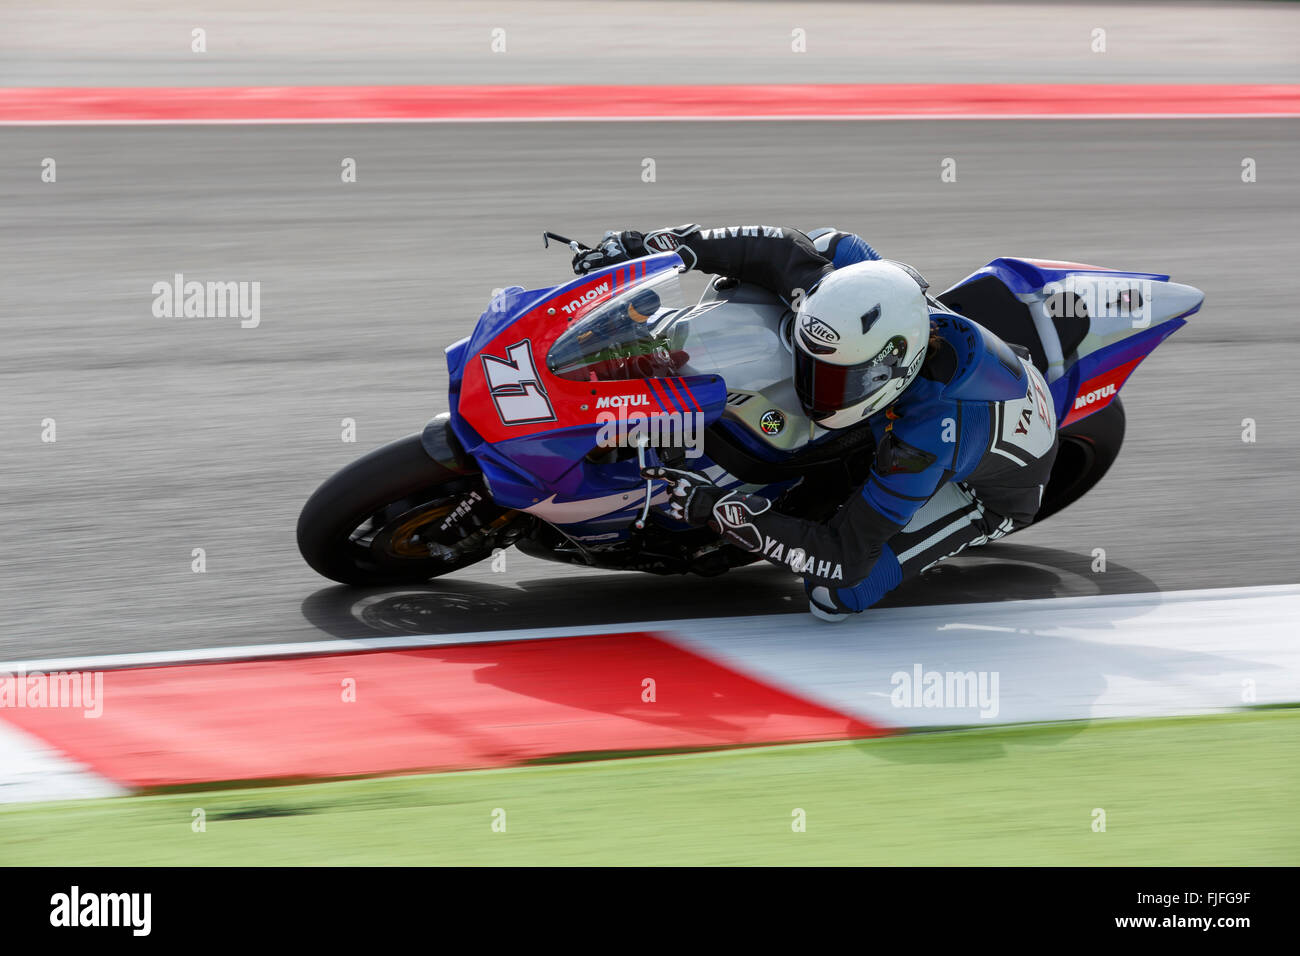 Misano Adriatico, Italy - June 21, 2015: Yamaha YZF R1 of MG Competition Team, driven by BERGMAN Christoffer Stock Photo